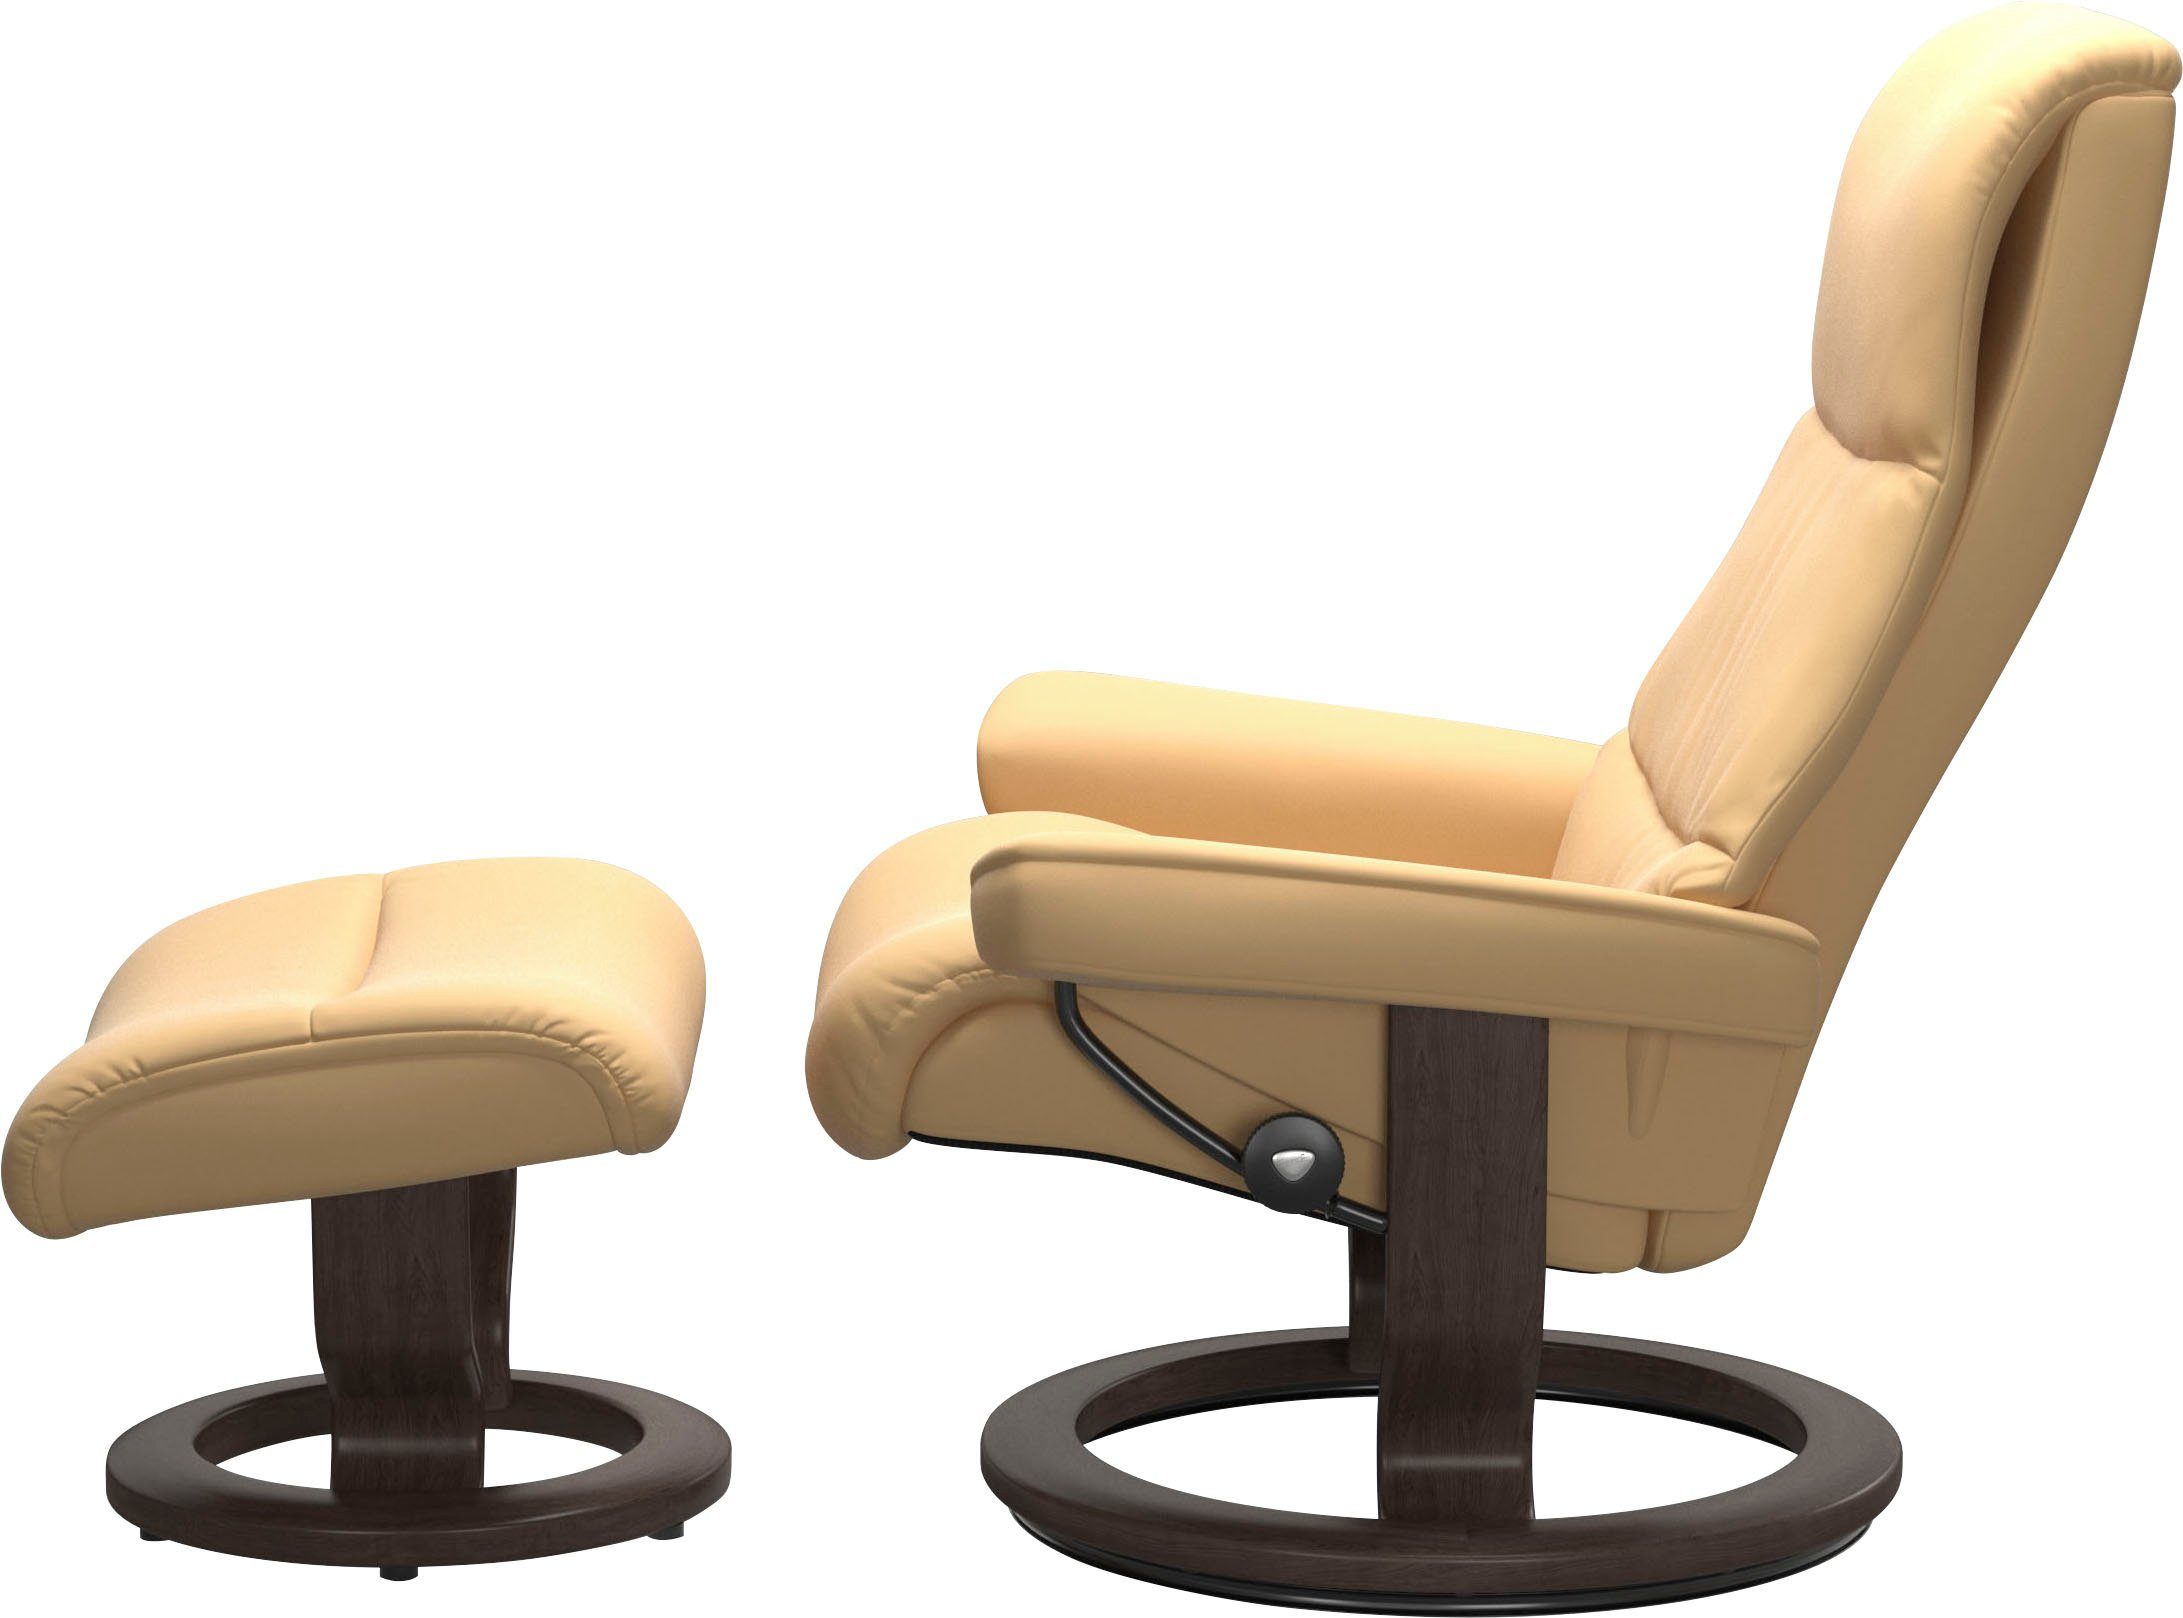 Stressless® Relaxsessel View, mit Classic Wenge Größe L,Gestell Base